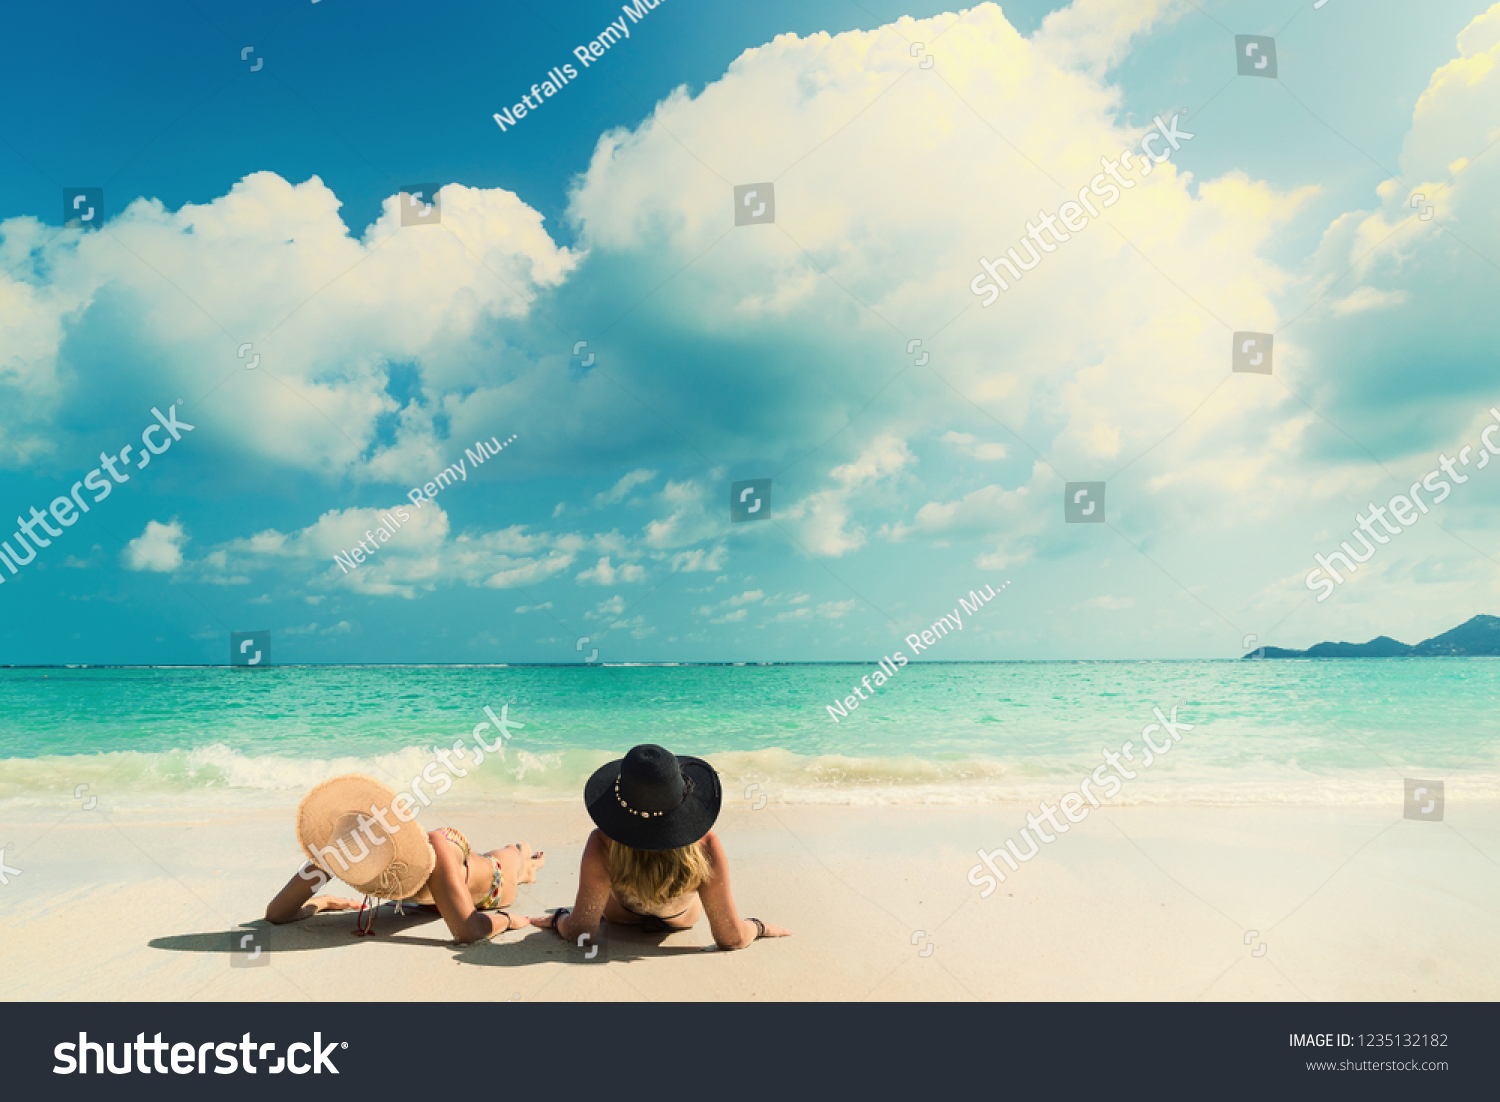 Woman suntanning - Winter holidays at the tropical beach #1235132182